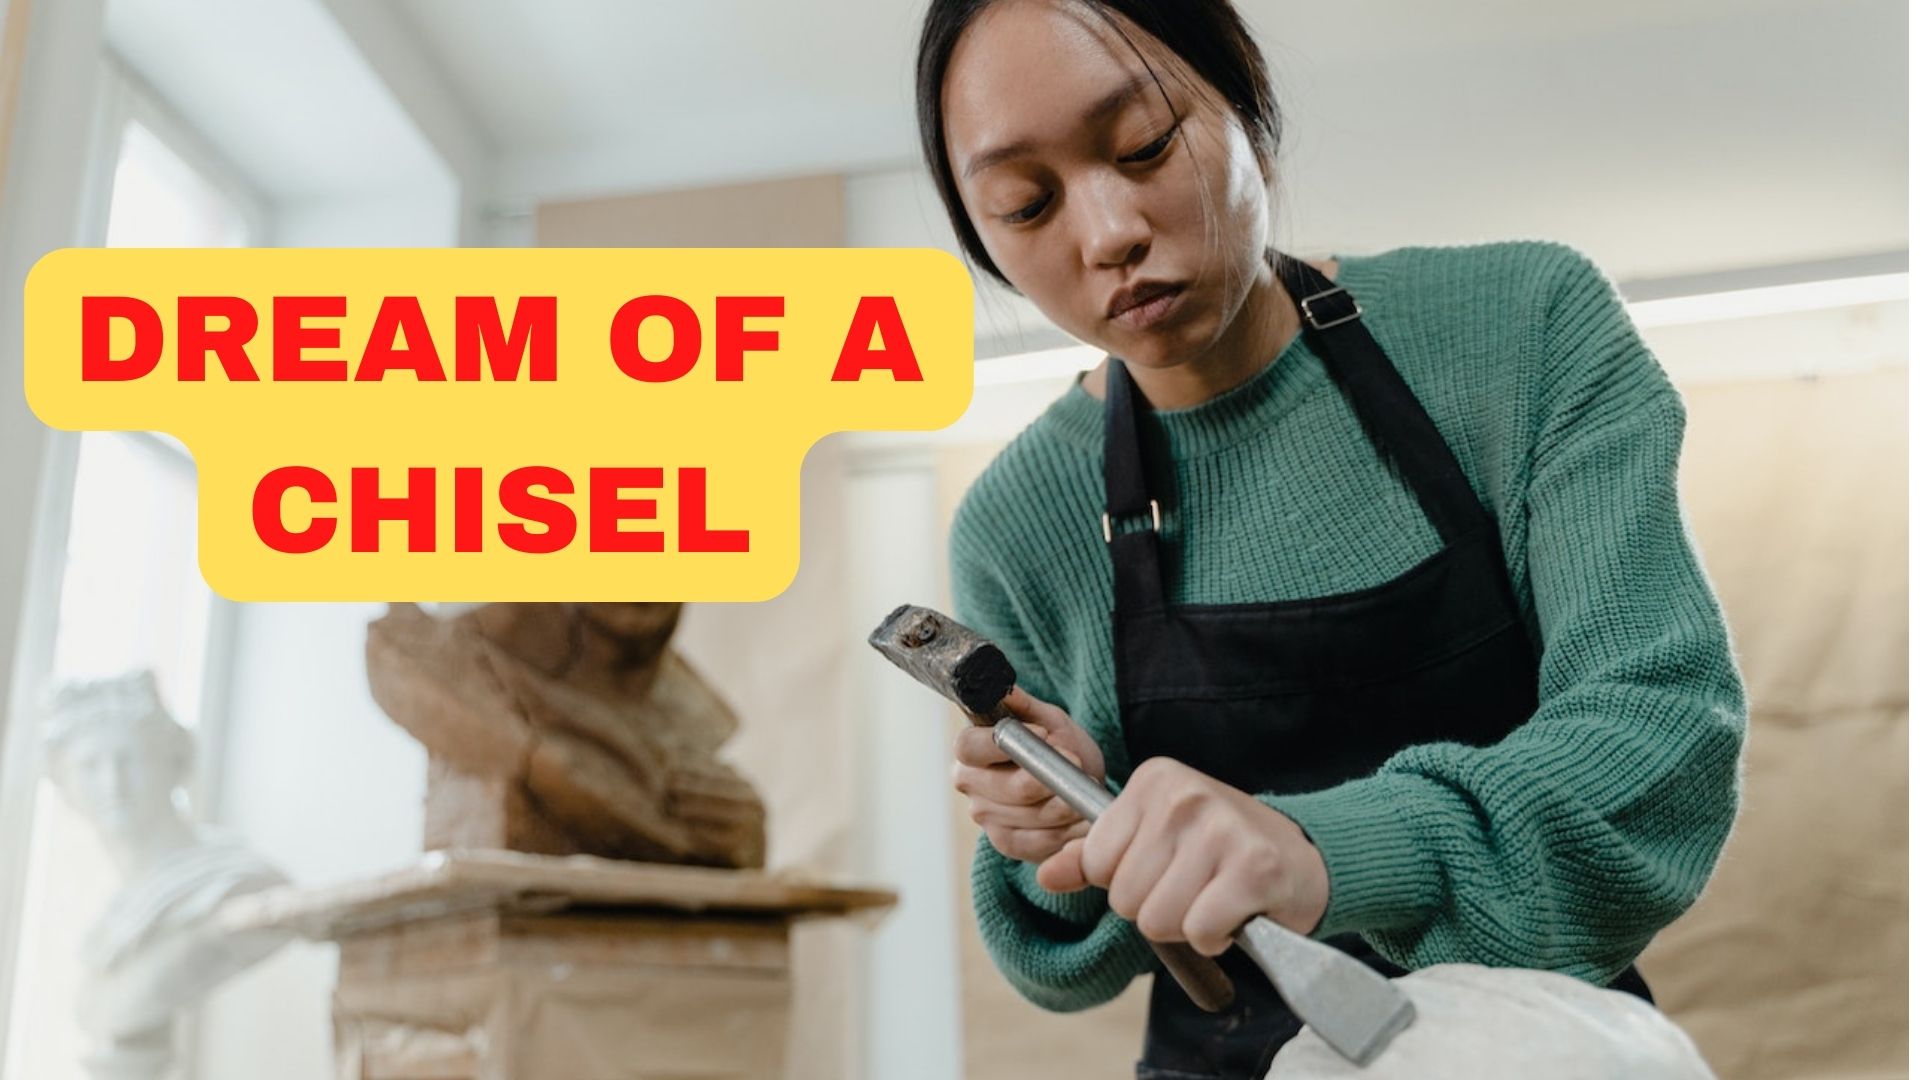 Dream Of A Chisel - It Symbolizes The Rapid Cessation Of Your Creativity